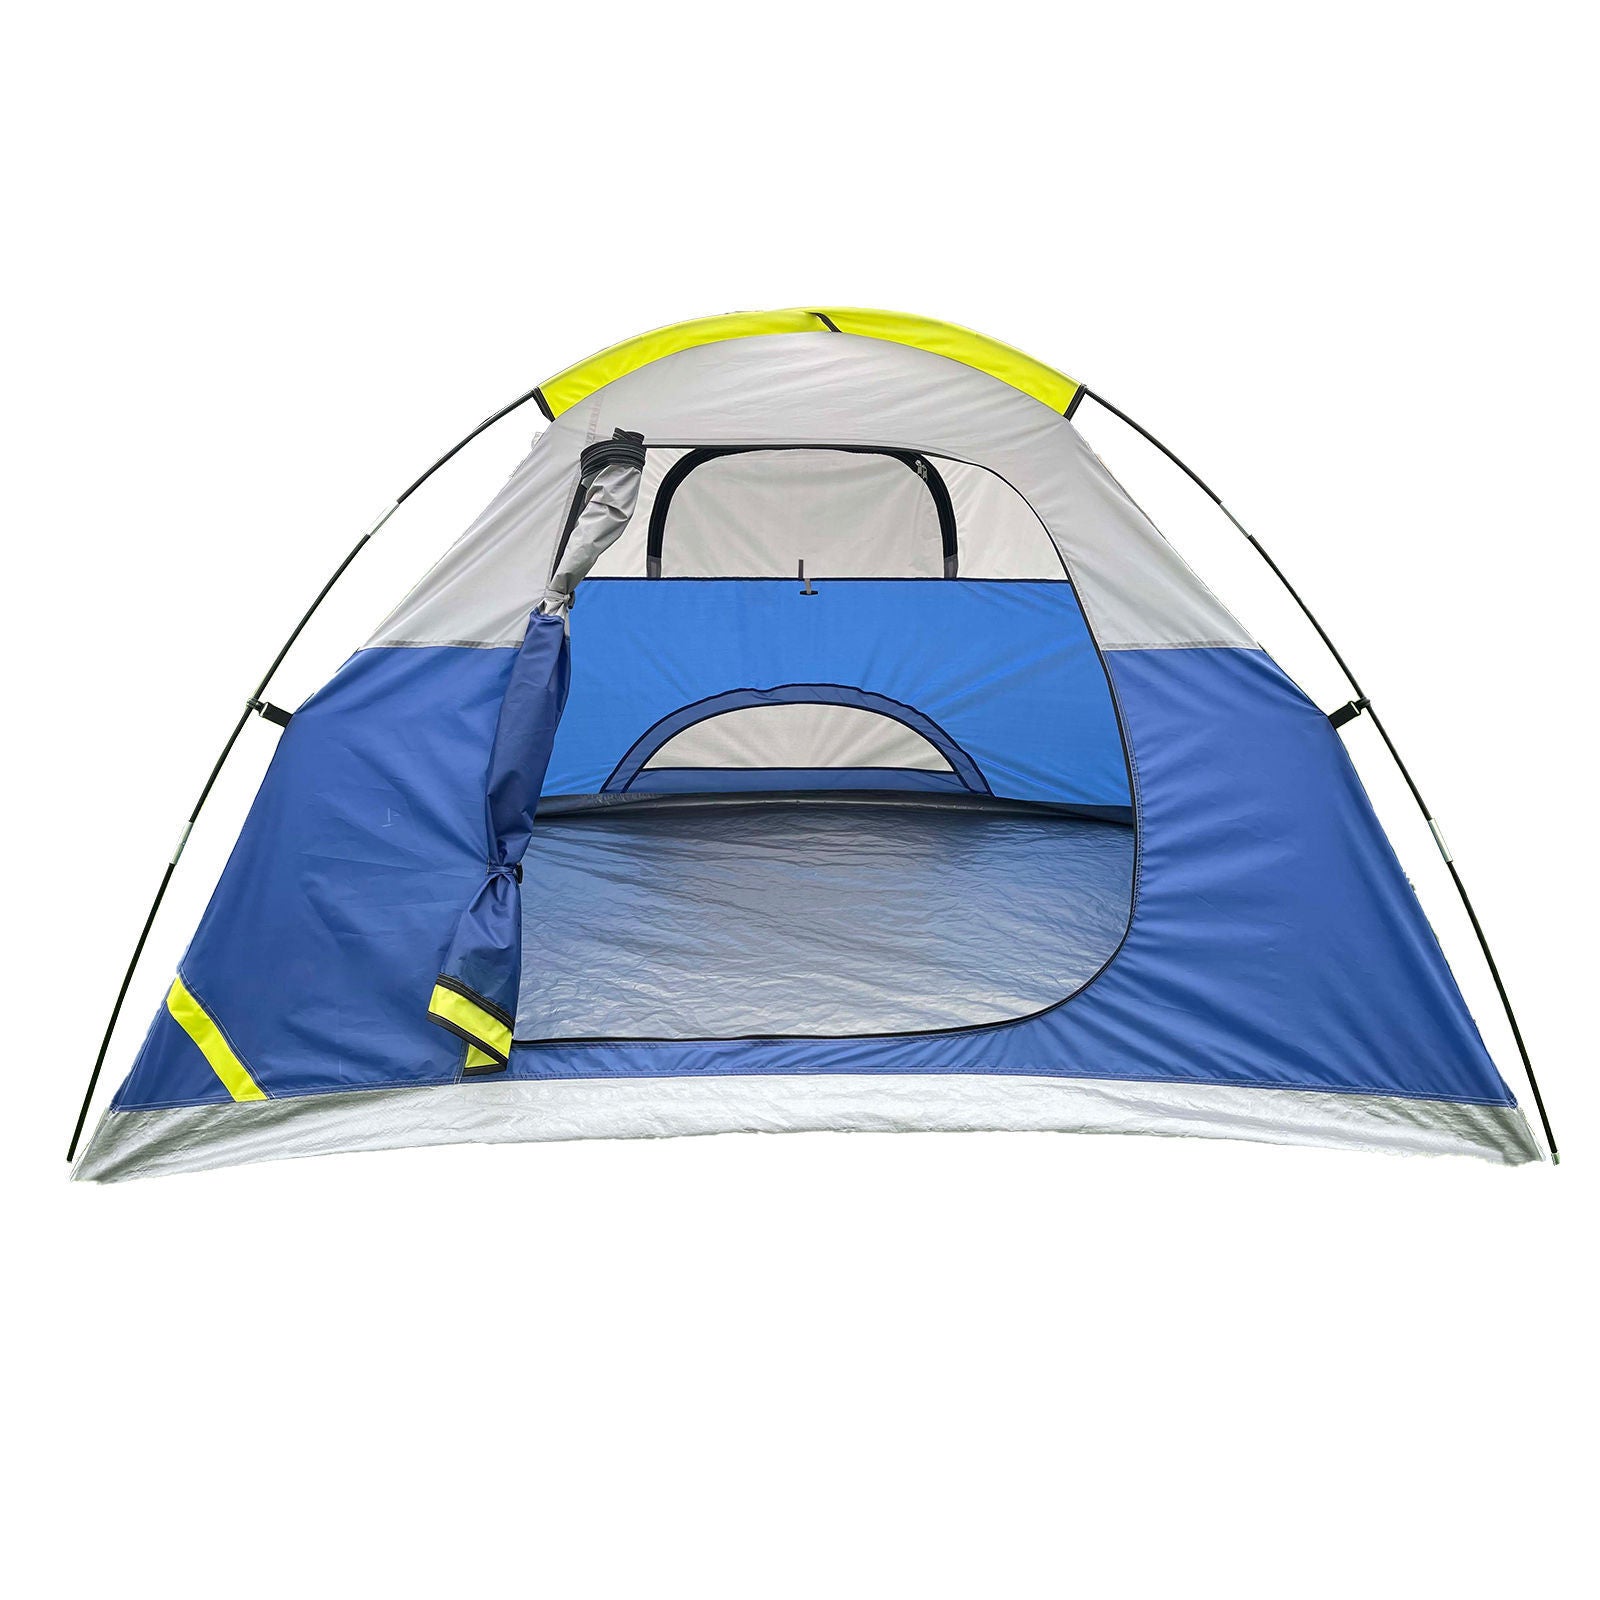 Havana Outdoors 2-3 Person Tent Lightweight Hiking Backpacking Camping - SILBERSHELL